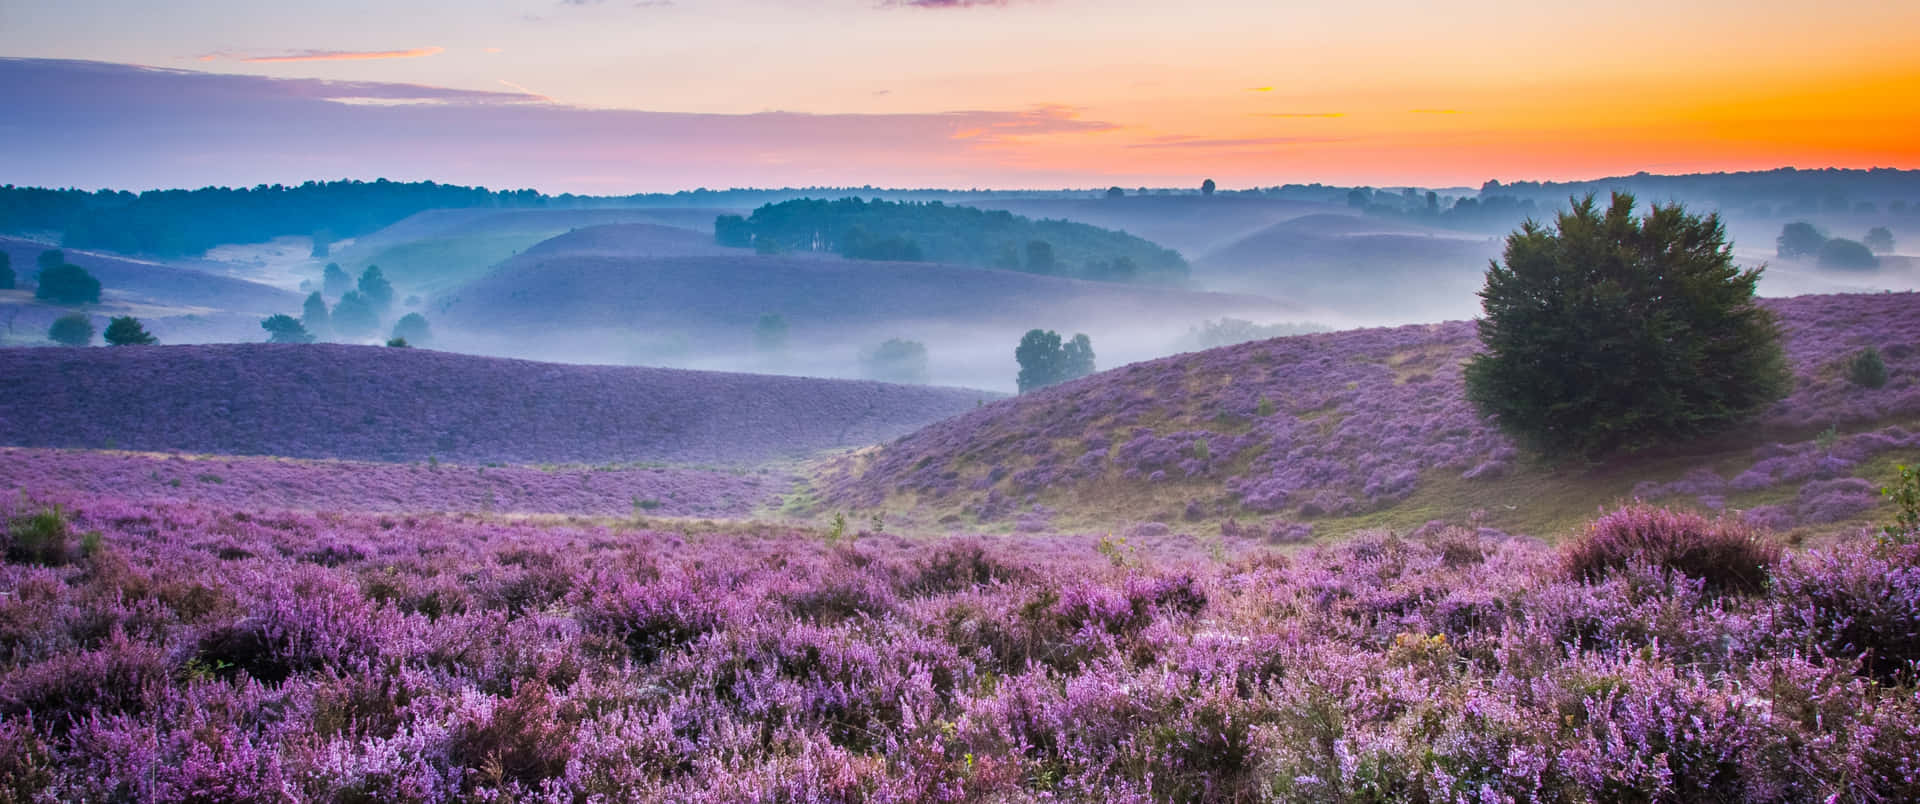 Exploring the beauty of the Lavender Fields Wallpaper